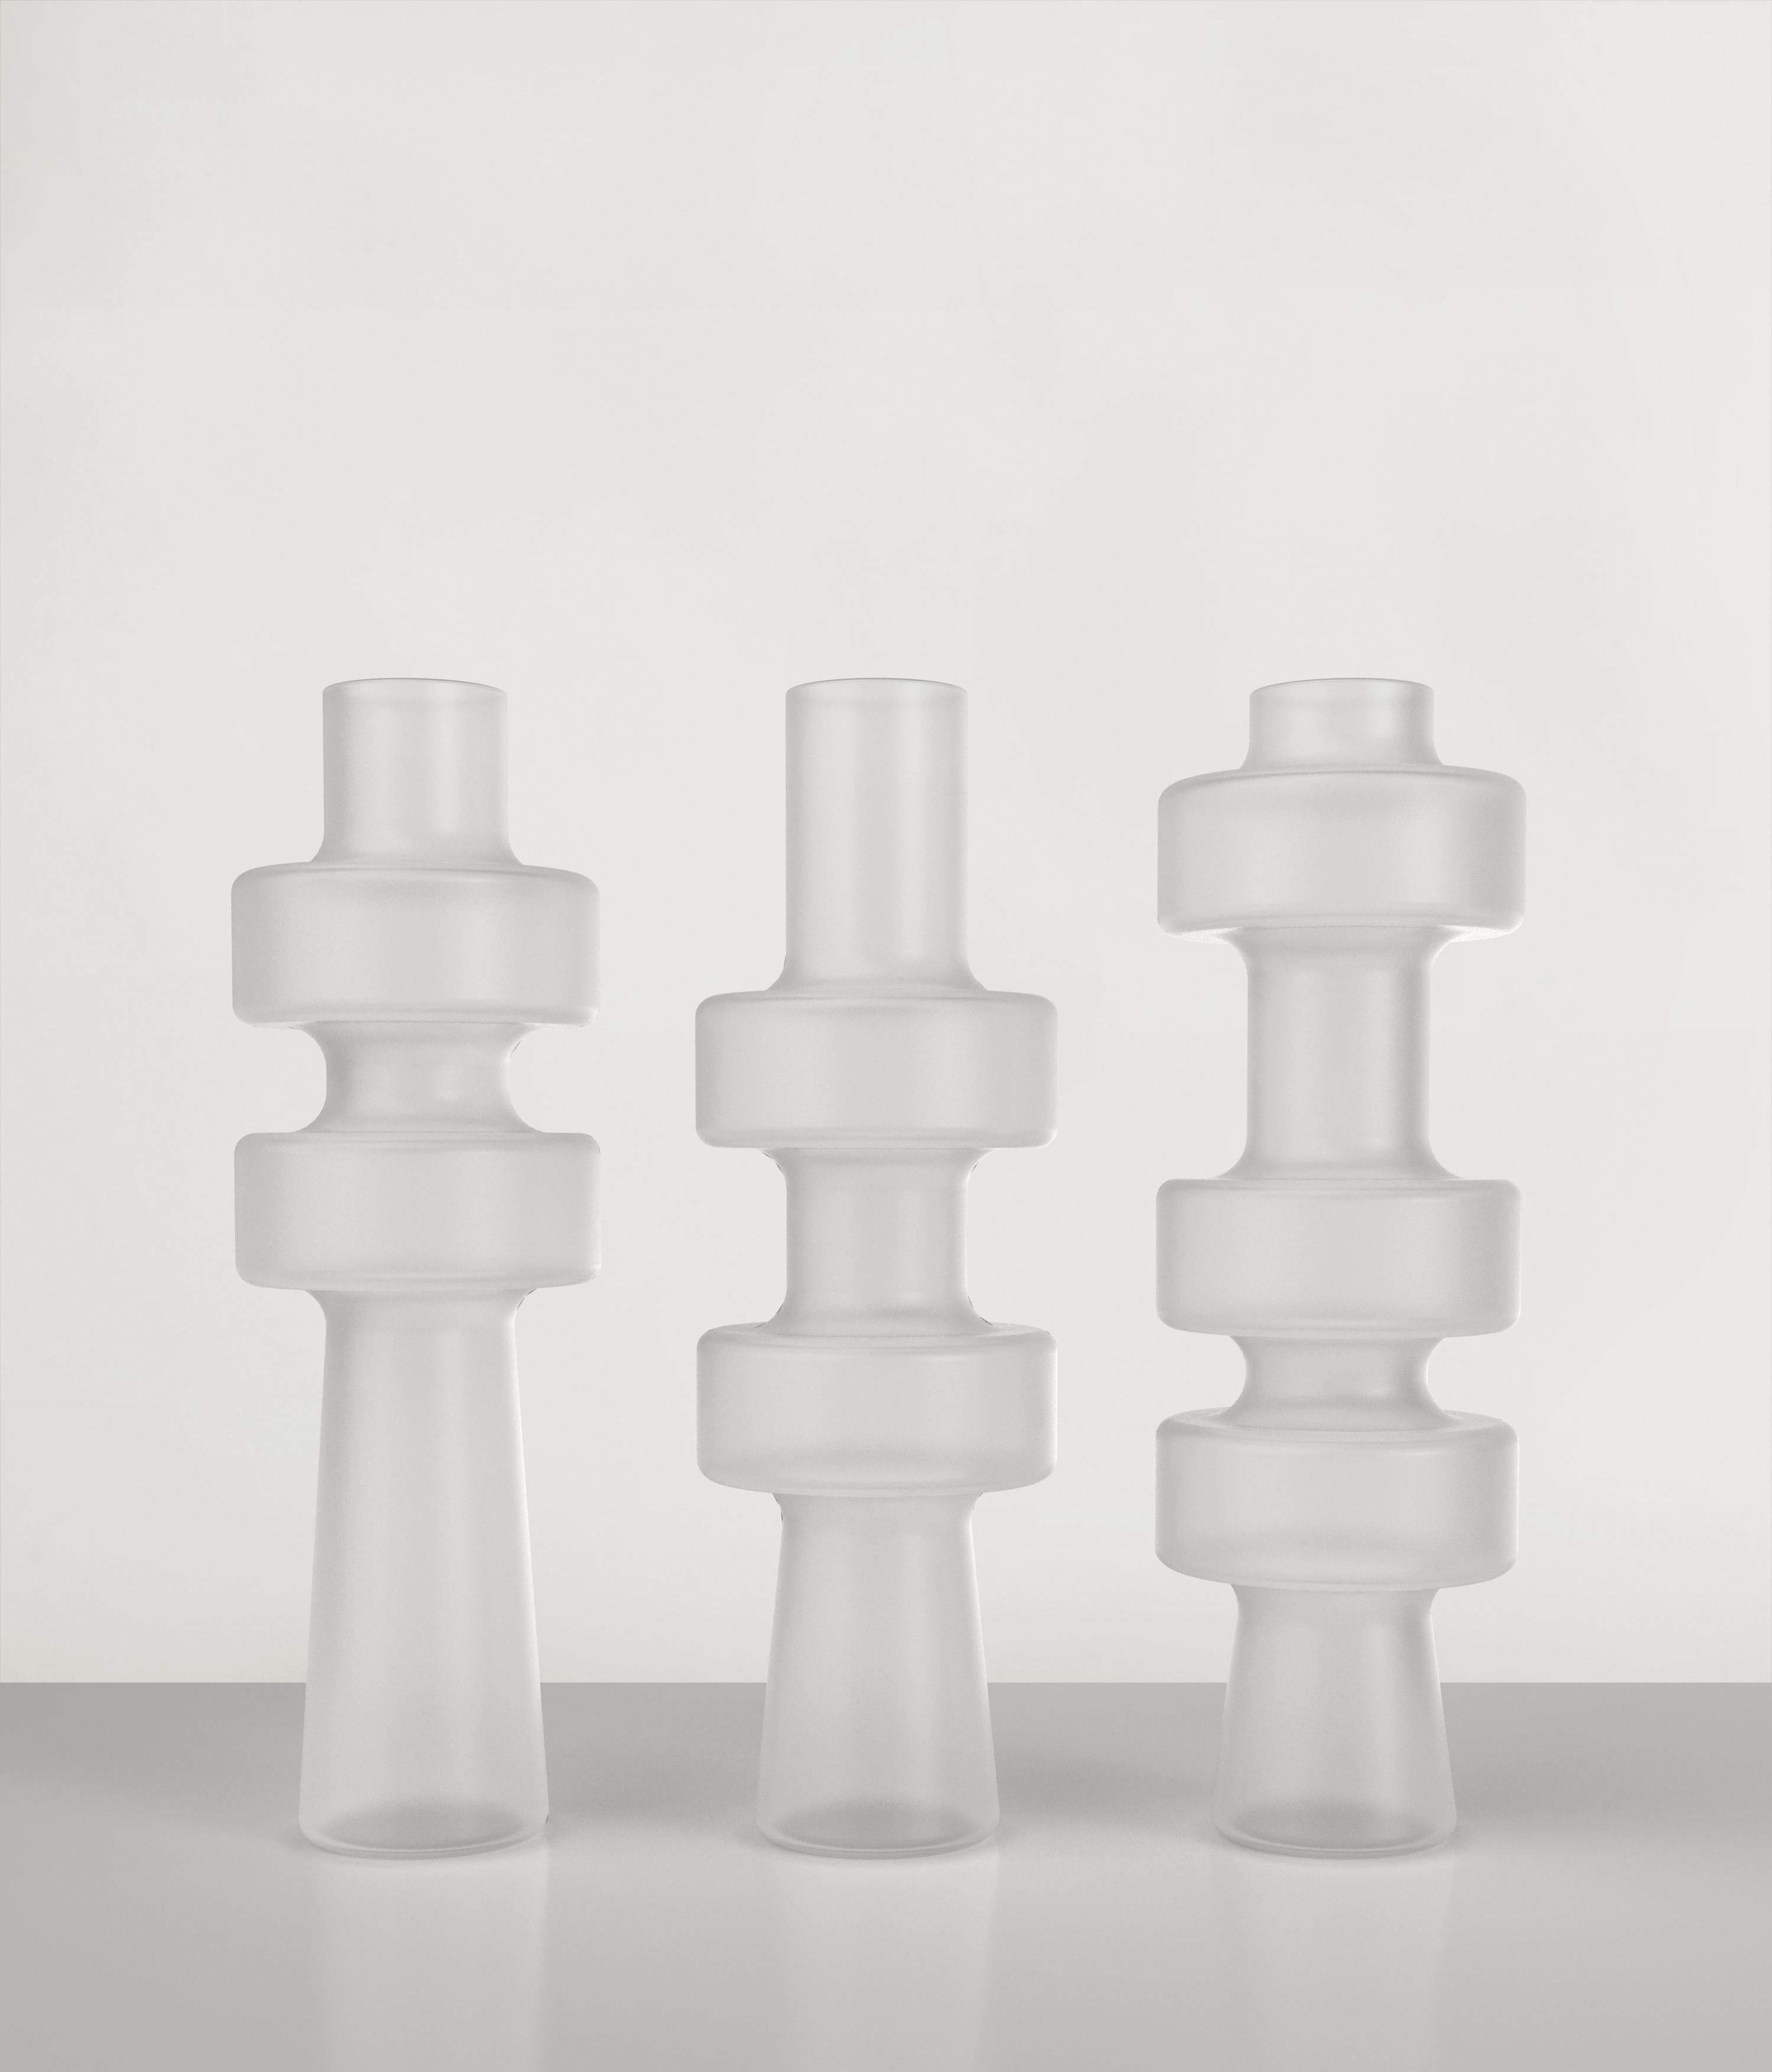 Set of 3 Uppa vases by Edizione Limitata
Limited Edition of 1000 pieces. Signed and numbered.
Dimensions: D12 x H38 cm
Materials: Sanded Glass

Uppa is a series of 21st Century sculptural vases made by Italian artisans in blown sanded glass.